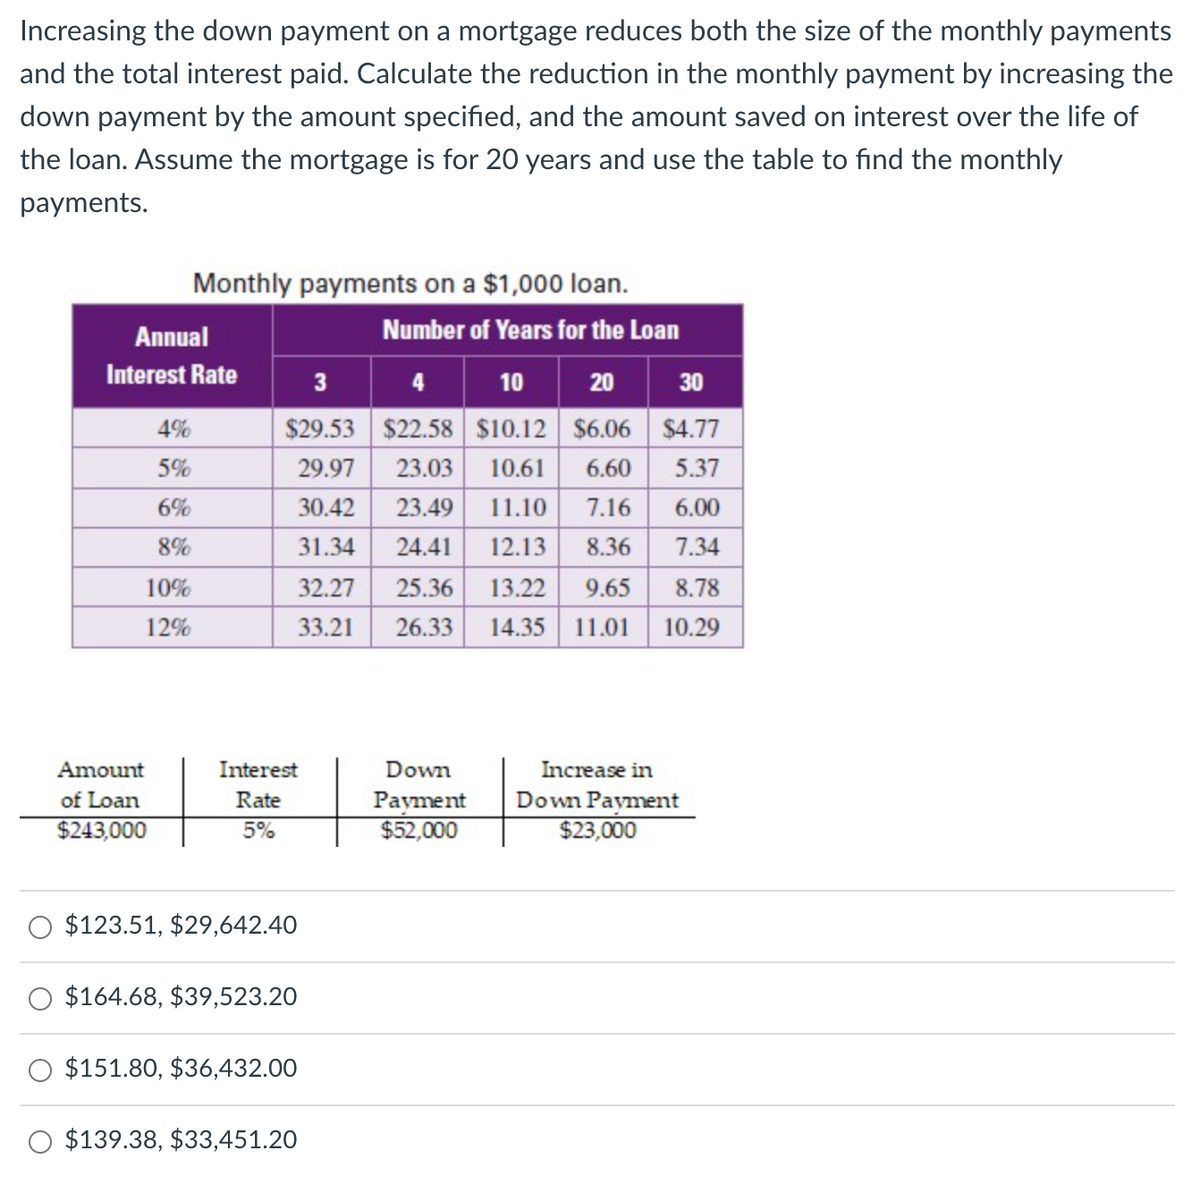 Increasing the down payment on a mortgage reduces both the size of the monthly payments
and the total interest paid. Calculate the reduction in the monthly payment by increasing the
down payment by the amount specified, and the amount saved on interest over the life of
the loan. Assume the mortgage is for 20 years and use the table to find the monthly
payments.
Monthly payments on a $1,000 loan.
Number of Years for the Loan
Annual
Interest Rate
3
10
20
30
4%
$29.53 $22.58 $10.12 $6.06 $4.77
5%
29.97
23.03
10.61
6%
30.42
23.49
6.60 5.37
11.10 7.16 6.00
8%
31.34
24.41
12.13
8.36 7.34
10%
32.27
25.36
13.22 9.65 8.78
12%
33.21
26.33
14.35 11.01 10.29
Amount
Interest
Down
Increase in
of Loan
$243,000
Rate
Payment
Down Payment
5%
$52,000
$23,000
$123.51, $29,642.40
$164.68, $39,523.20
$151.80, $36,432.00
$139.38, $33,451.20